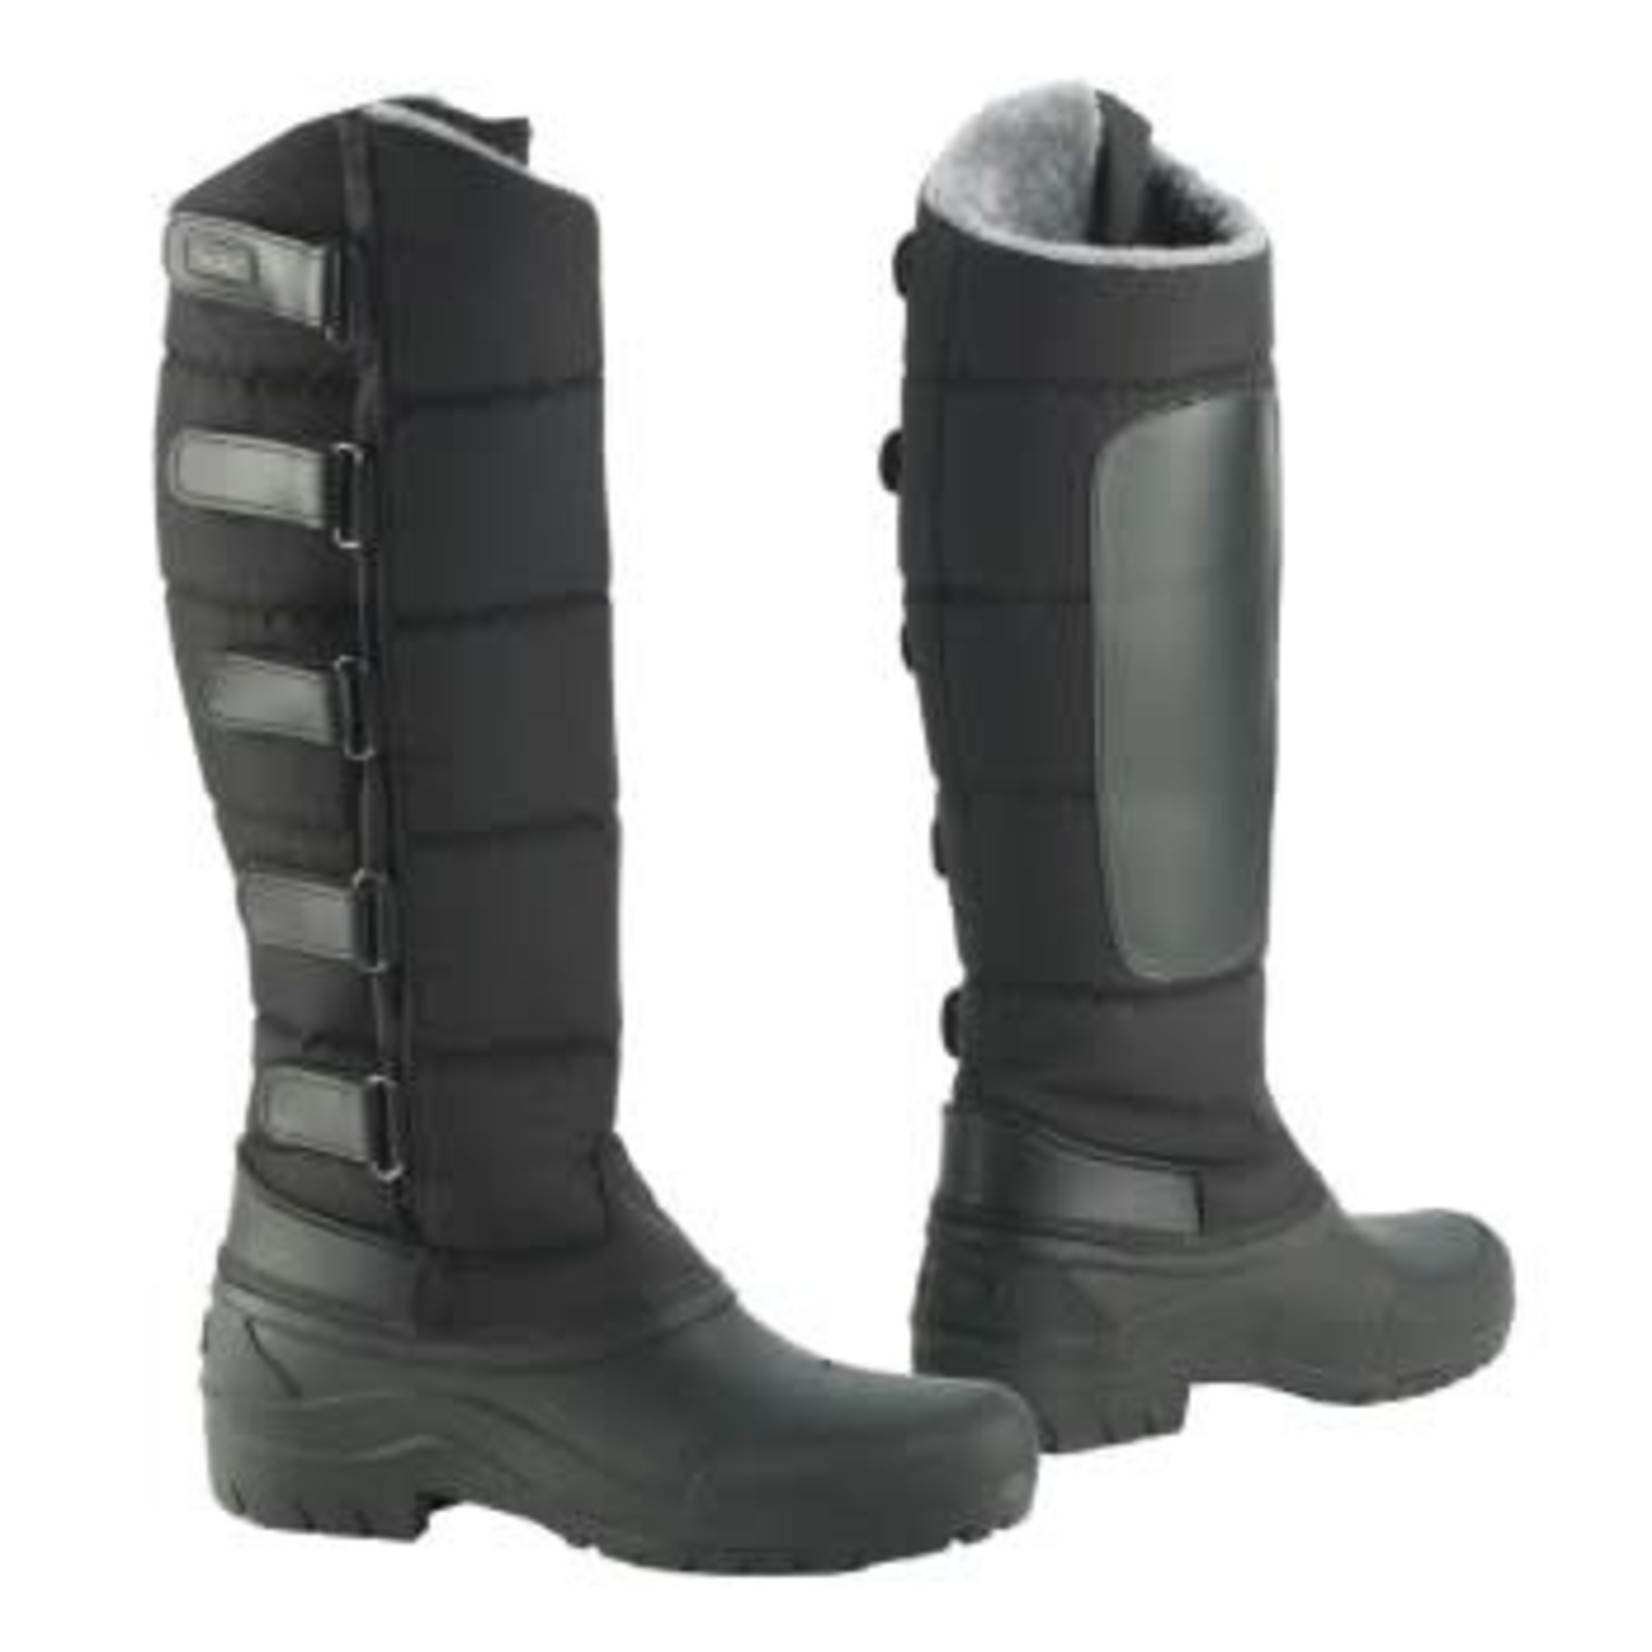 Ovation Blizzard Extreme Boots